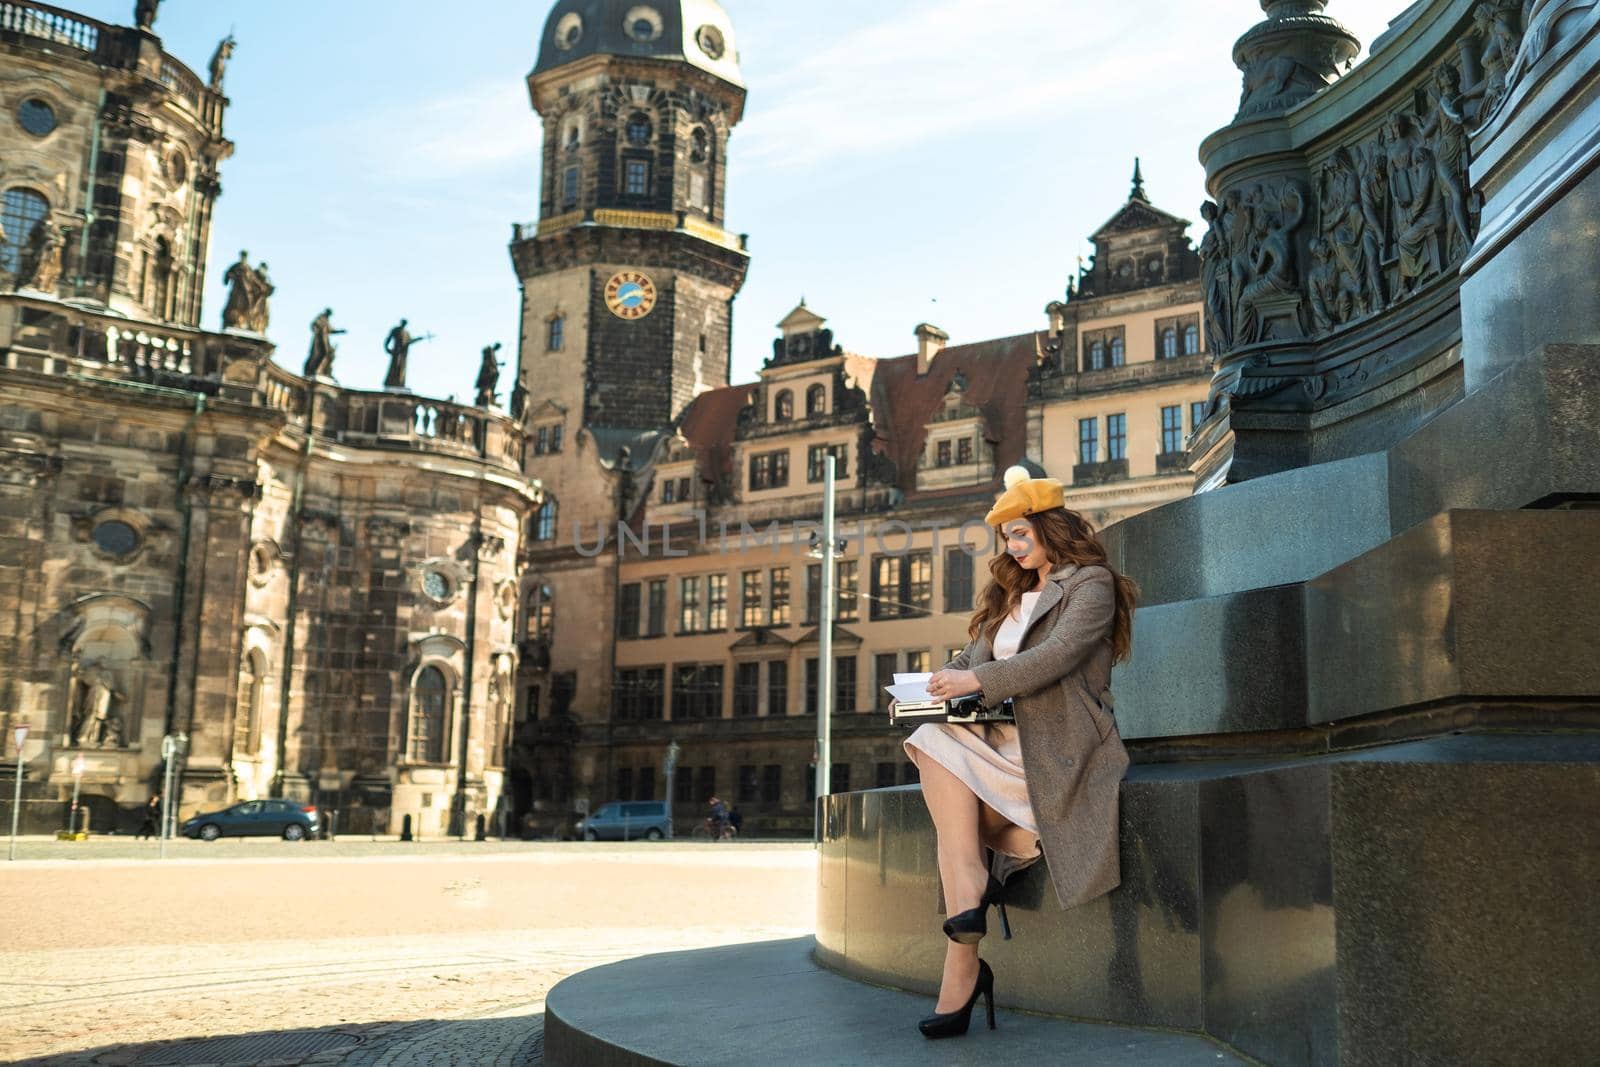 a girl in a coat and hat sits in the center of the old city of Dresden and types on a typewriter .Germany.